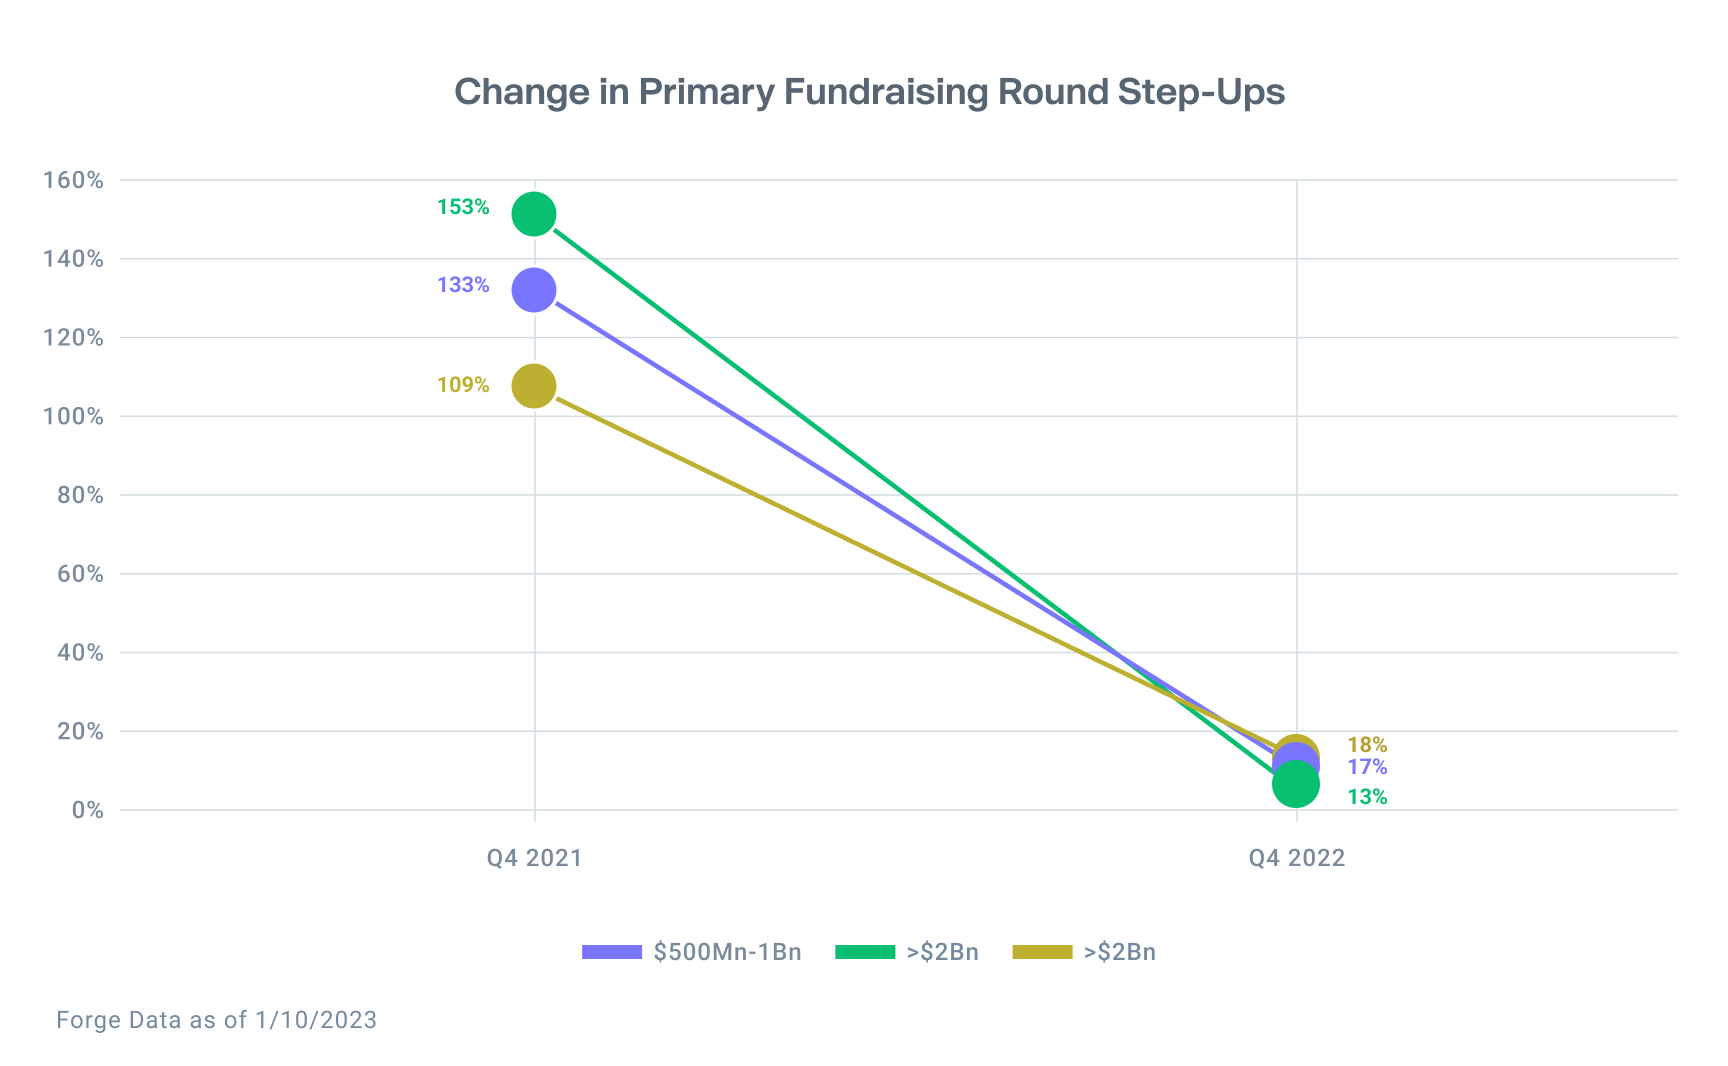 Graph shows change in primary fundraising round step-ups